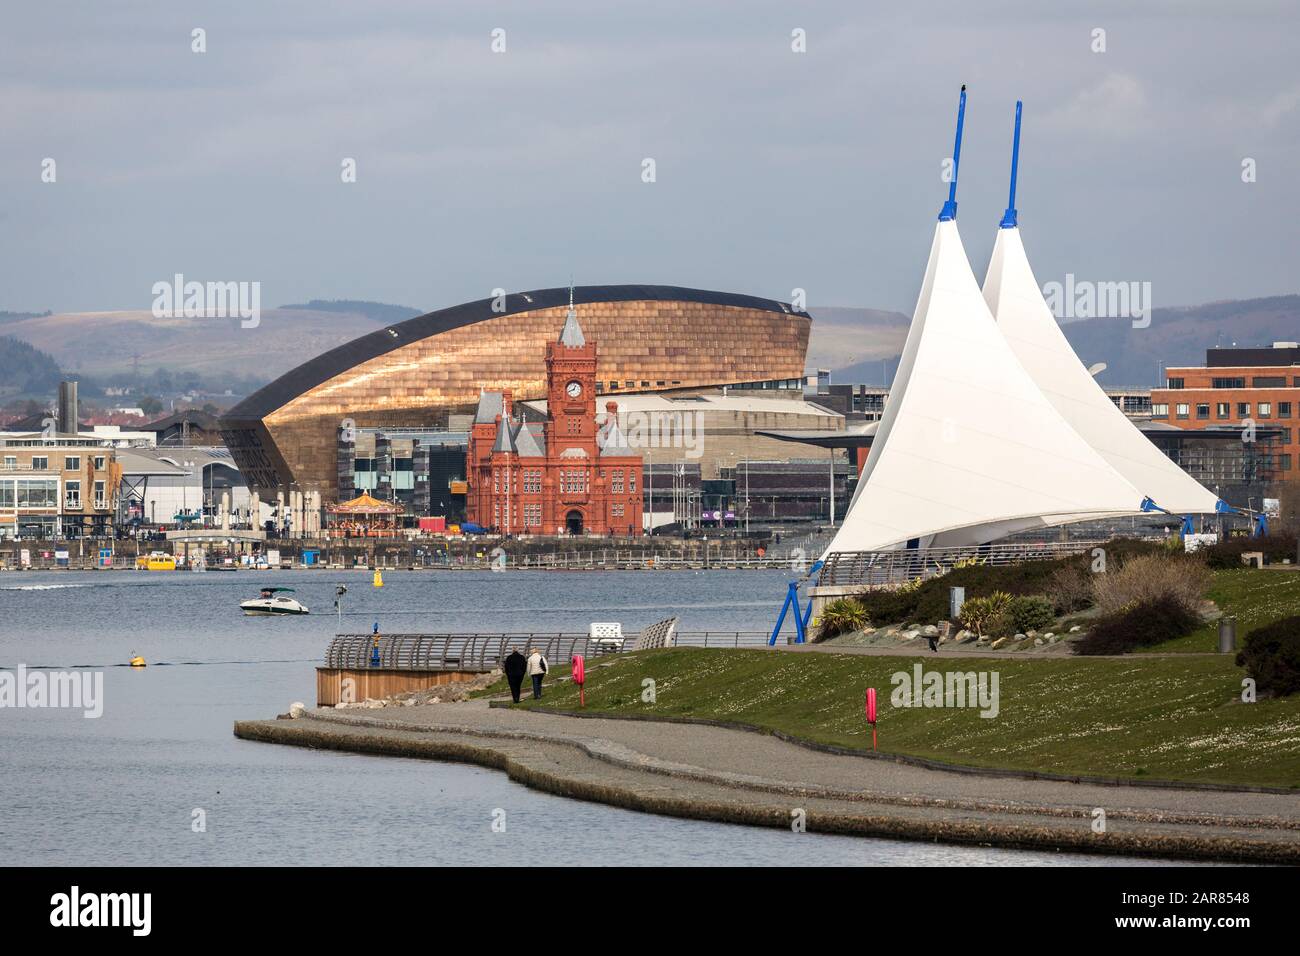 Pavilion with people walking along the barrage with the Pierhead building and Millennium Centre, Cardiff Bay, Wales, UK Stock Photo